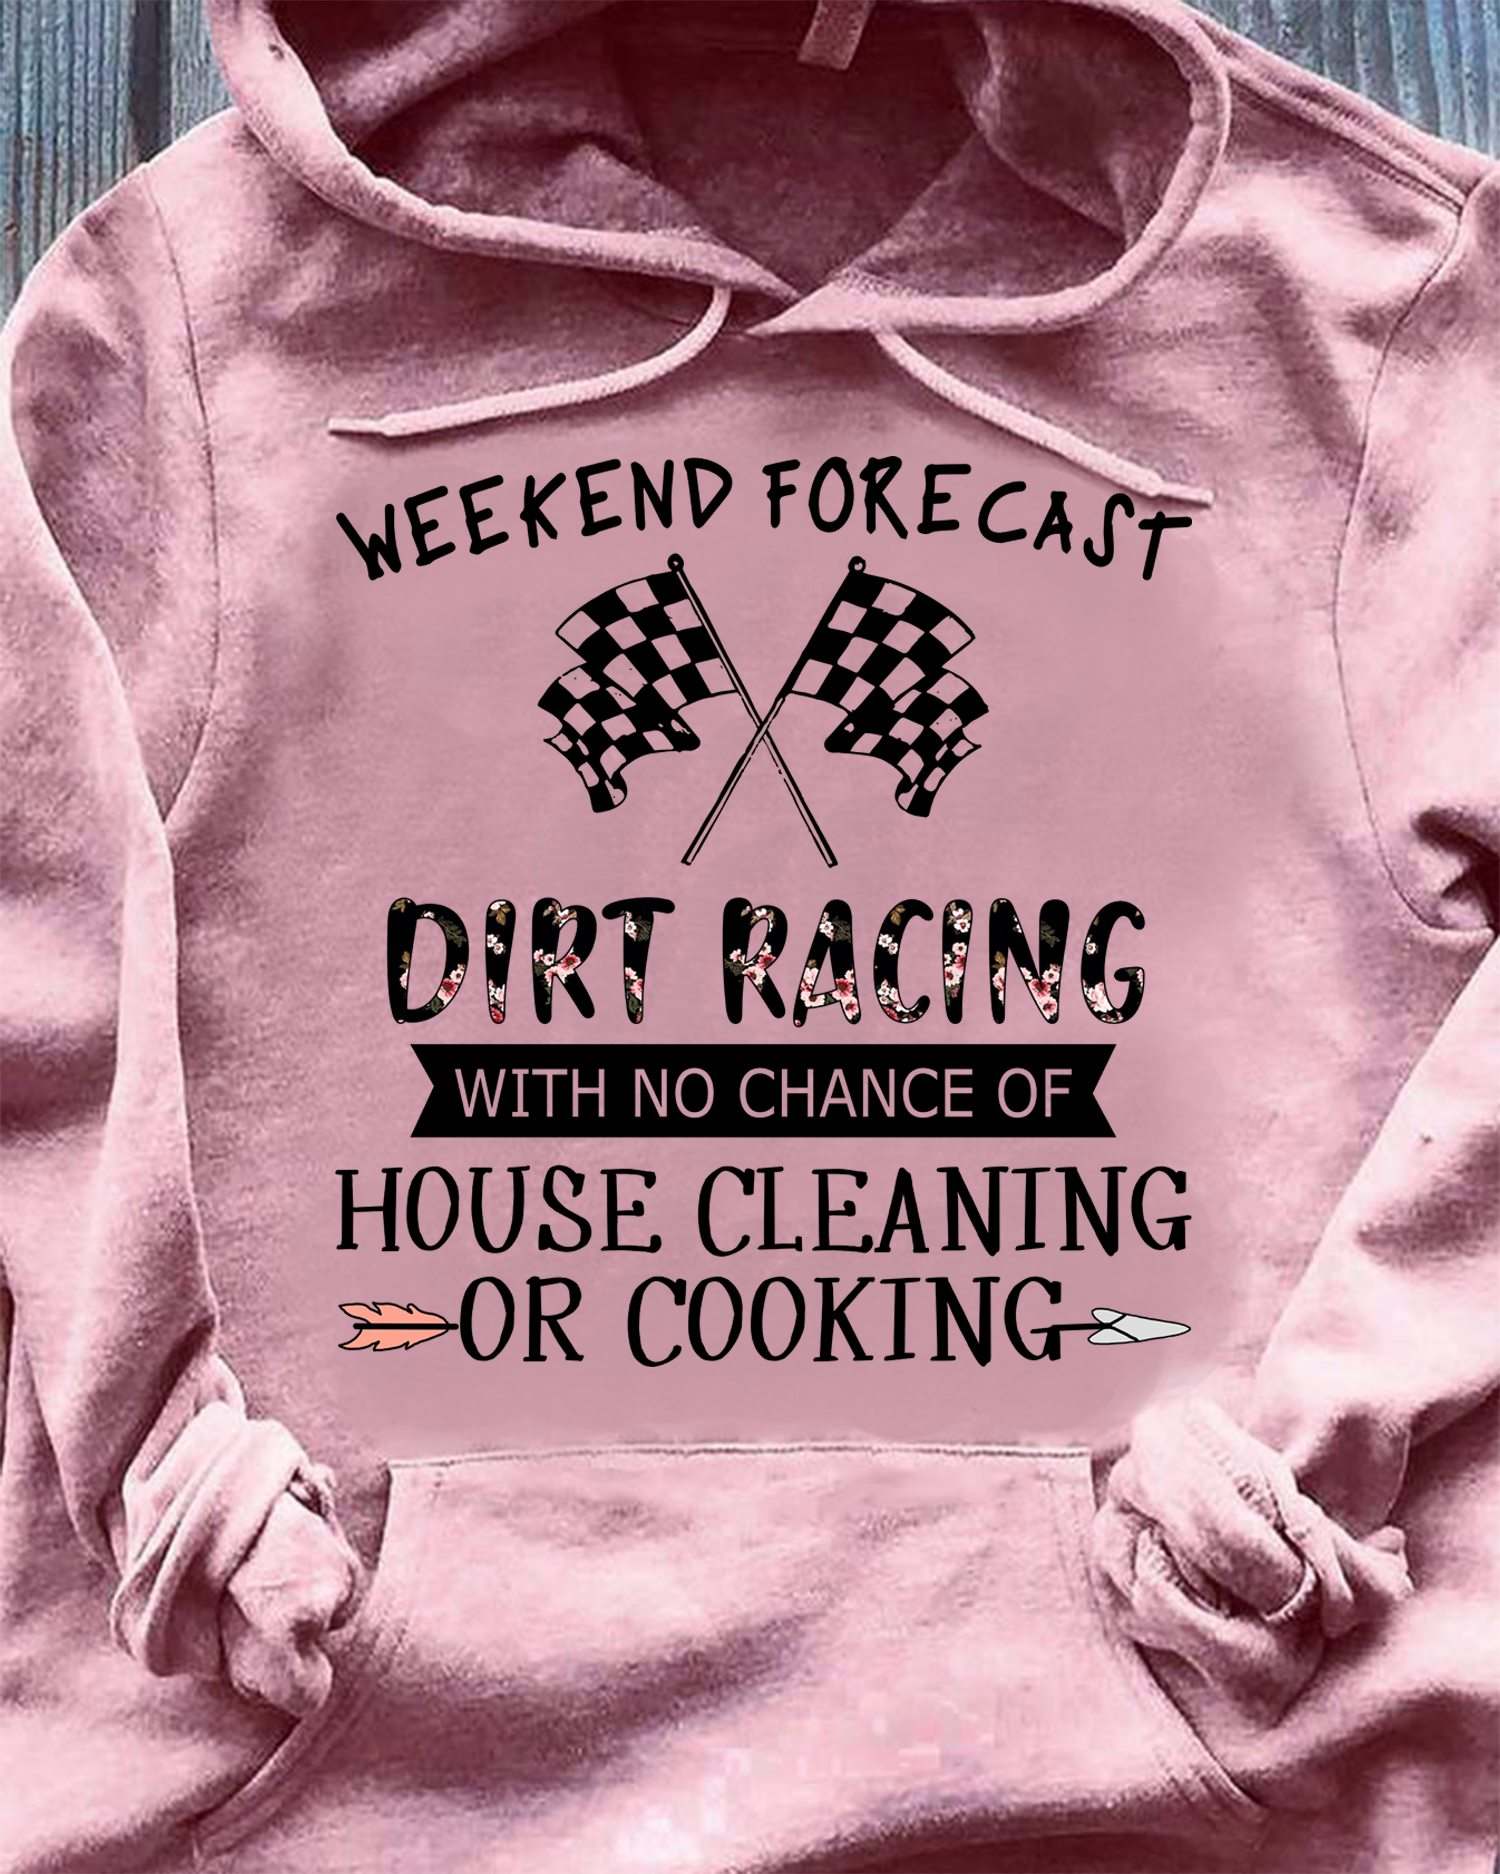 Dirt Racing Lover - Weekend forecast dirt racing with no chance of house cleaning or cooking